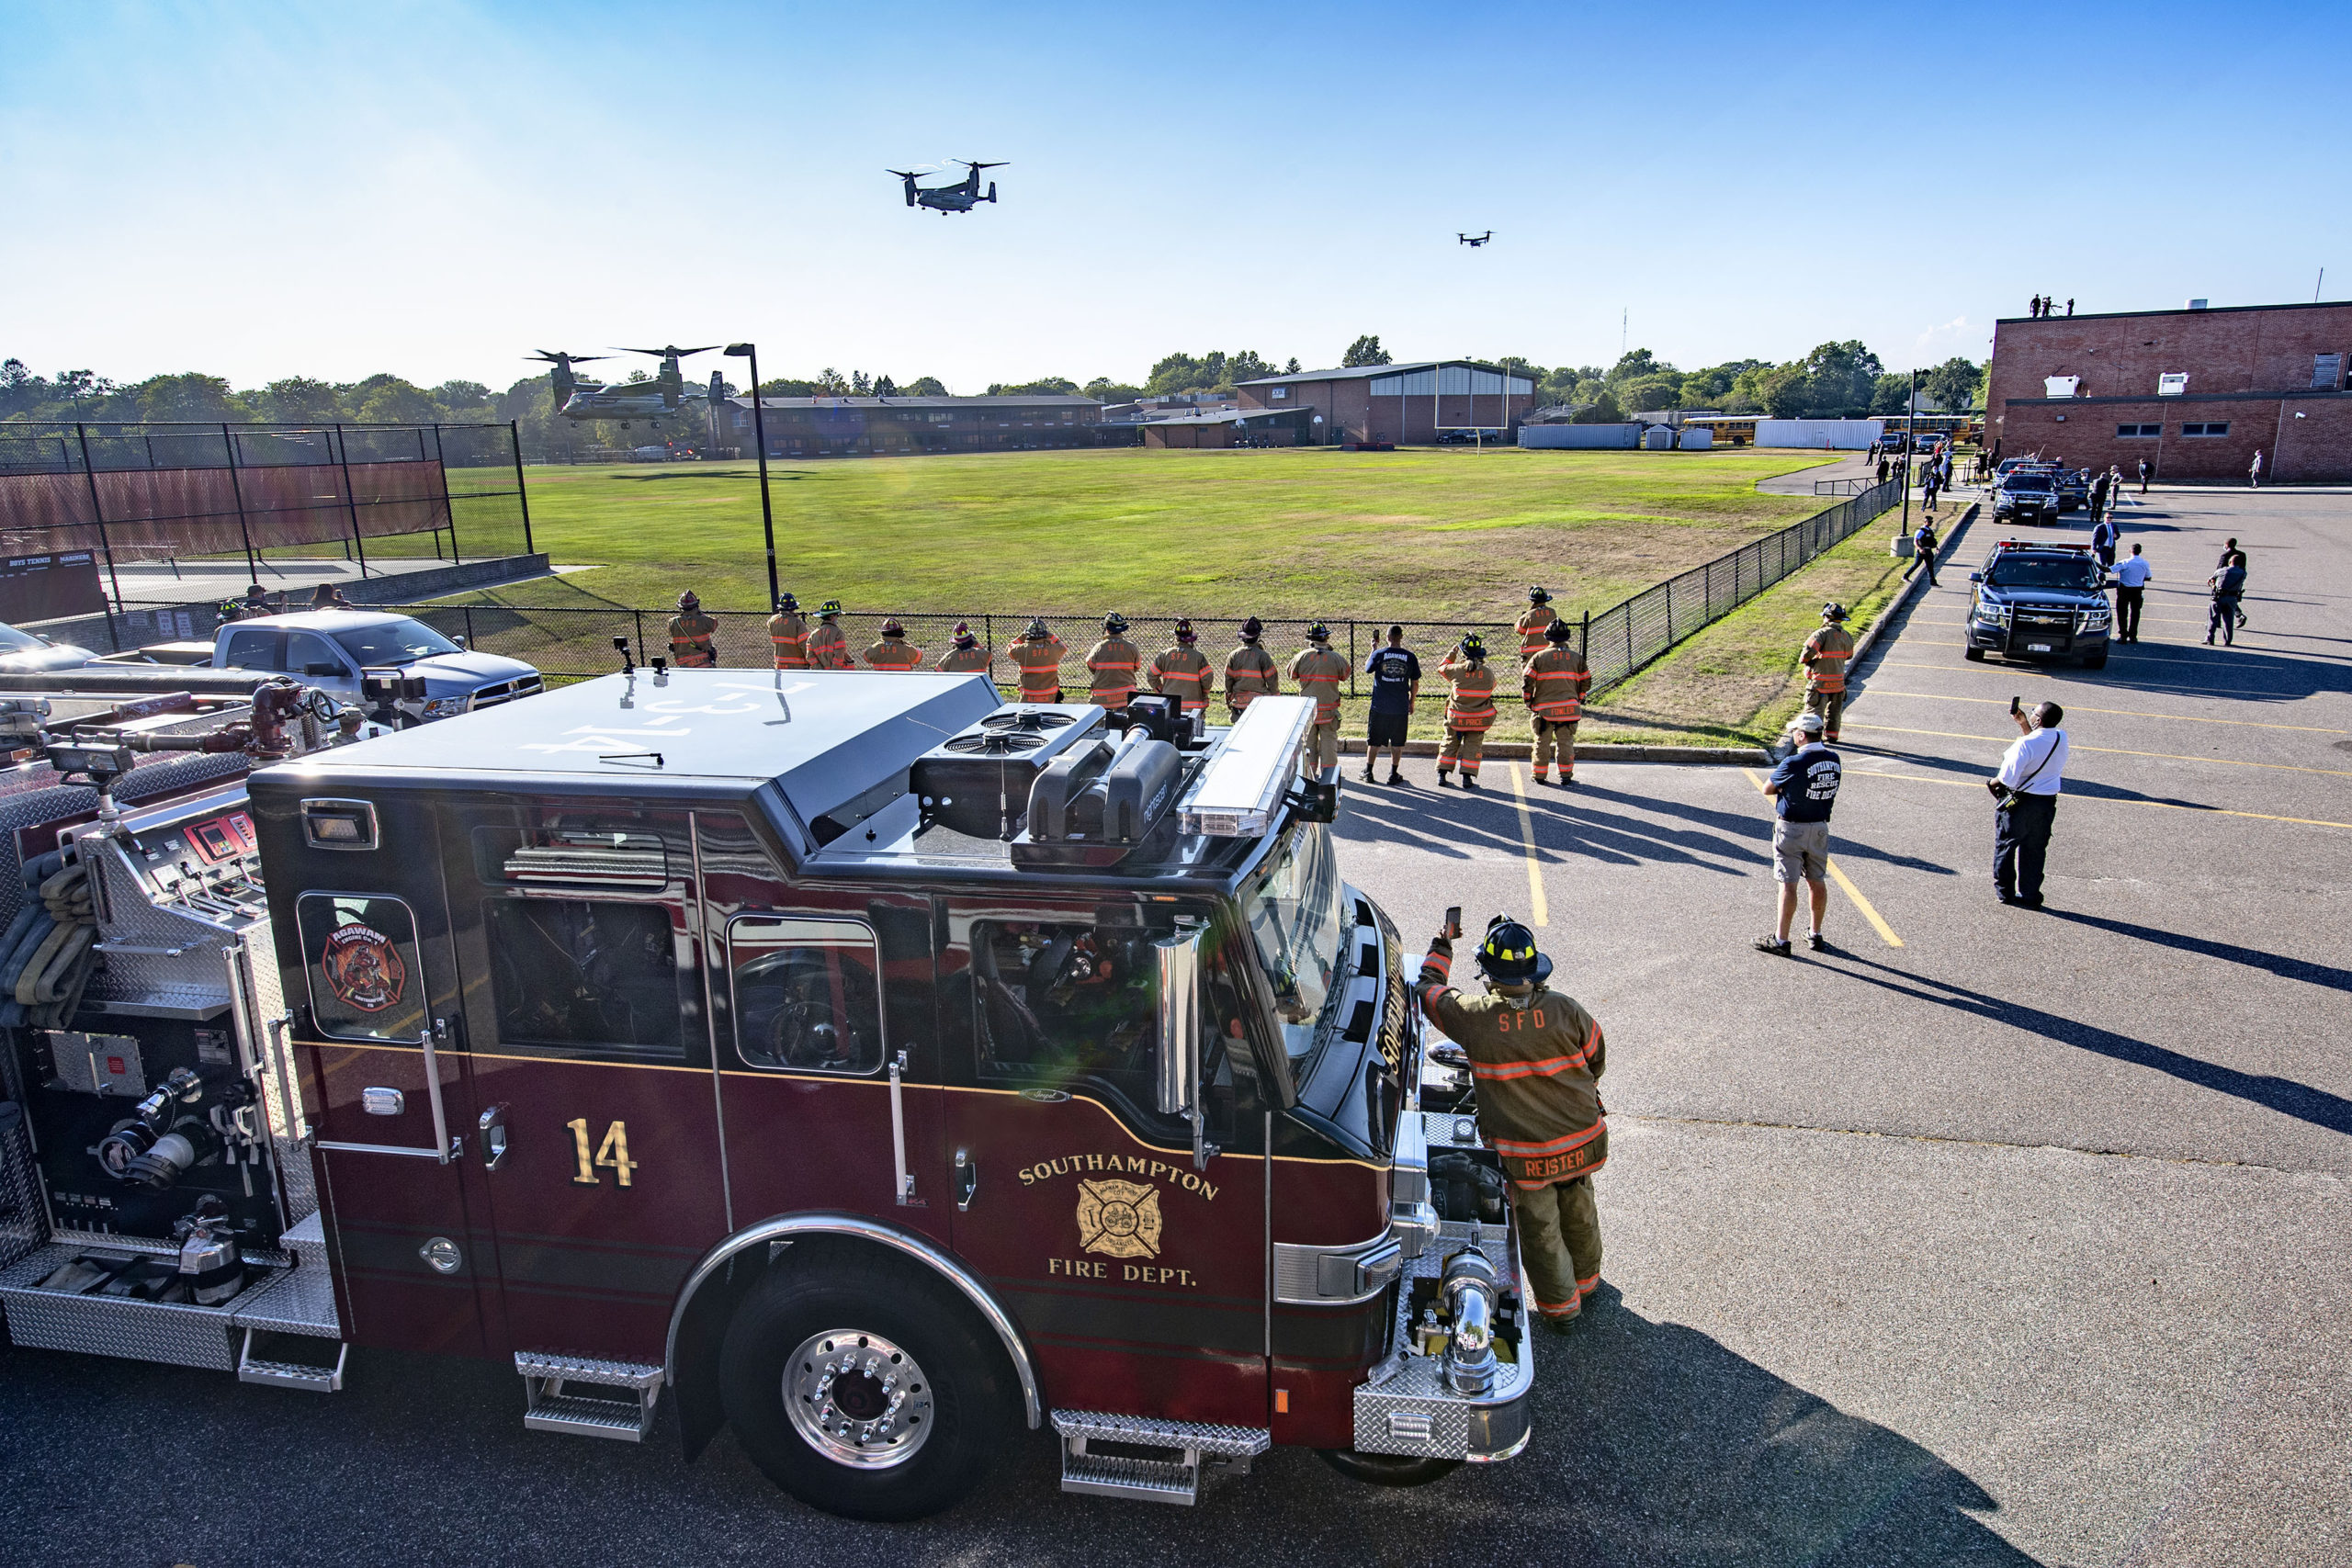 Members of the Southampton Fire Department look on as Marine Osprey aircraft carrying presidential staff come in for a landing at the athletic fields behind Southampton High School during President Trump's visit to the Hamptons on Saturday.    MICHAEL HELLER